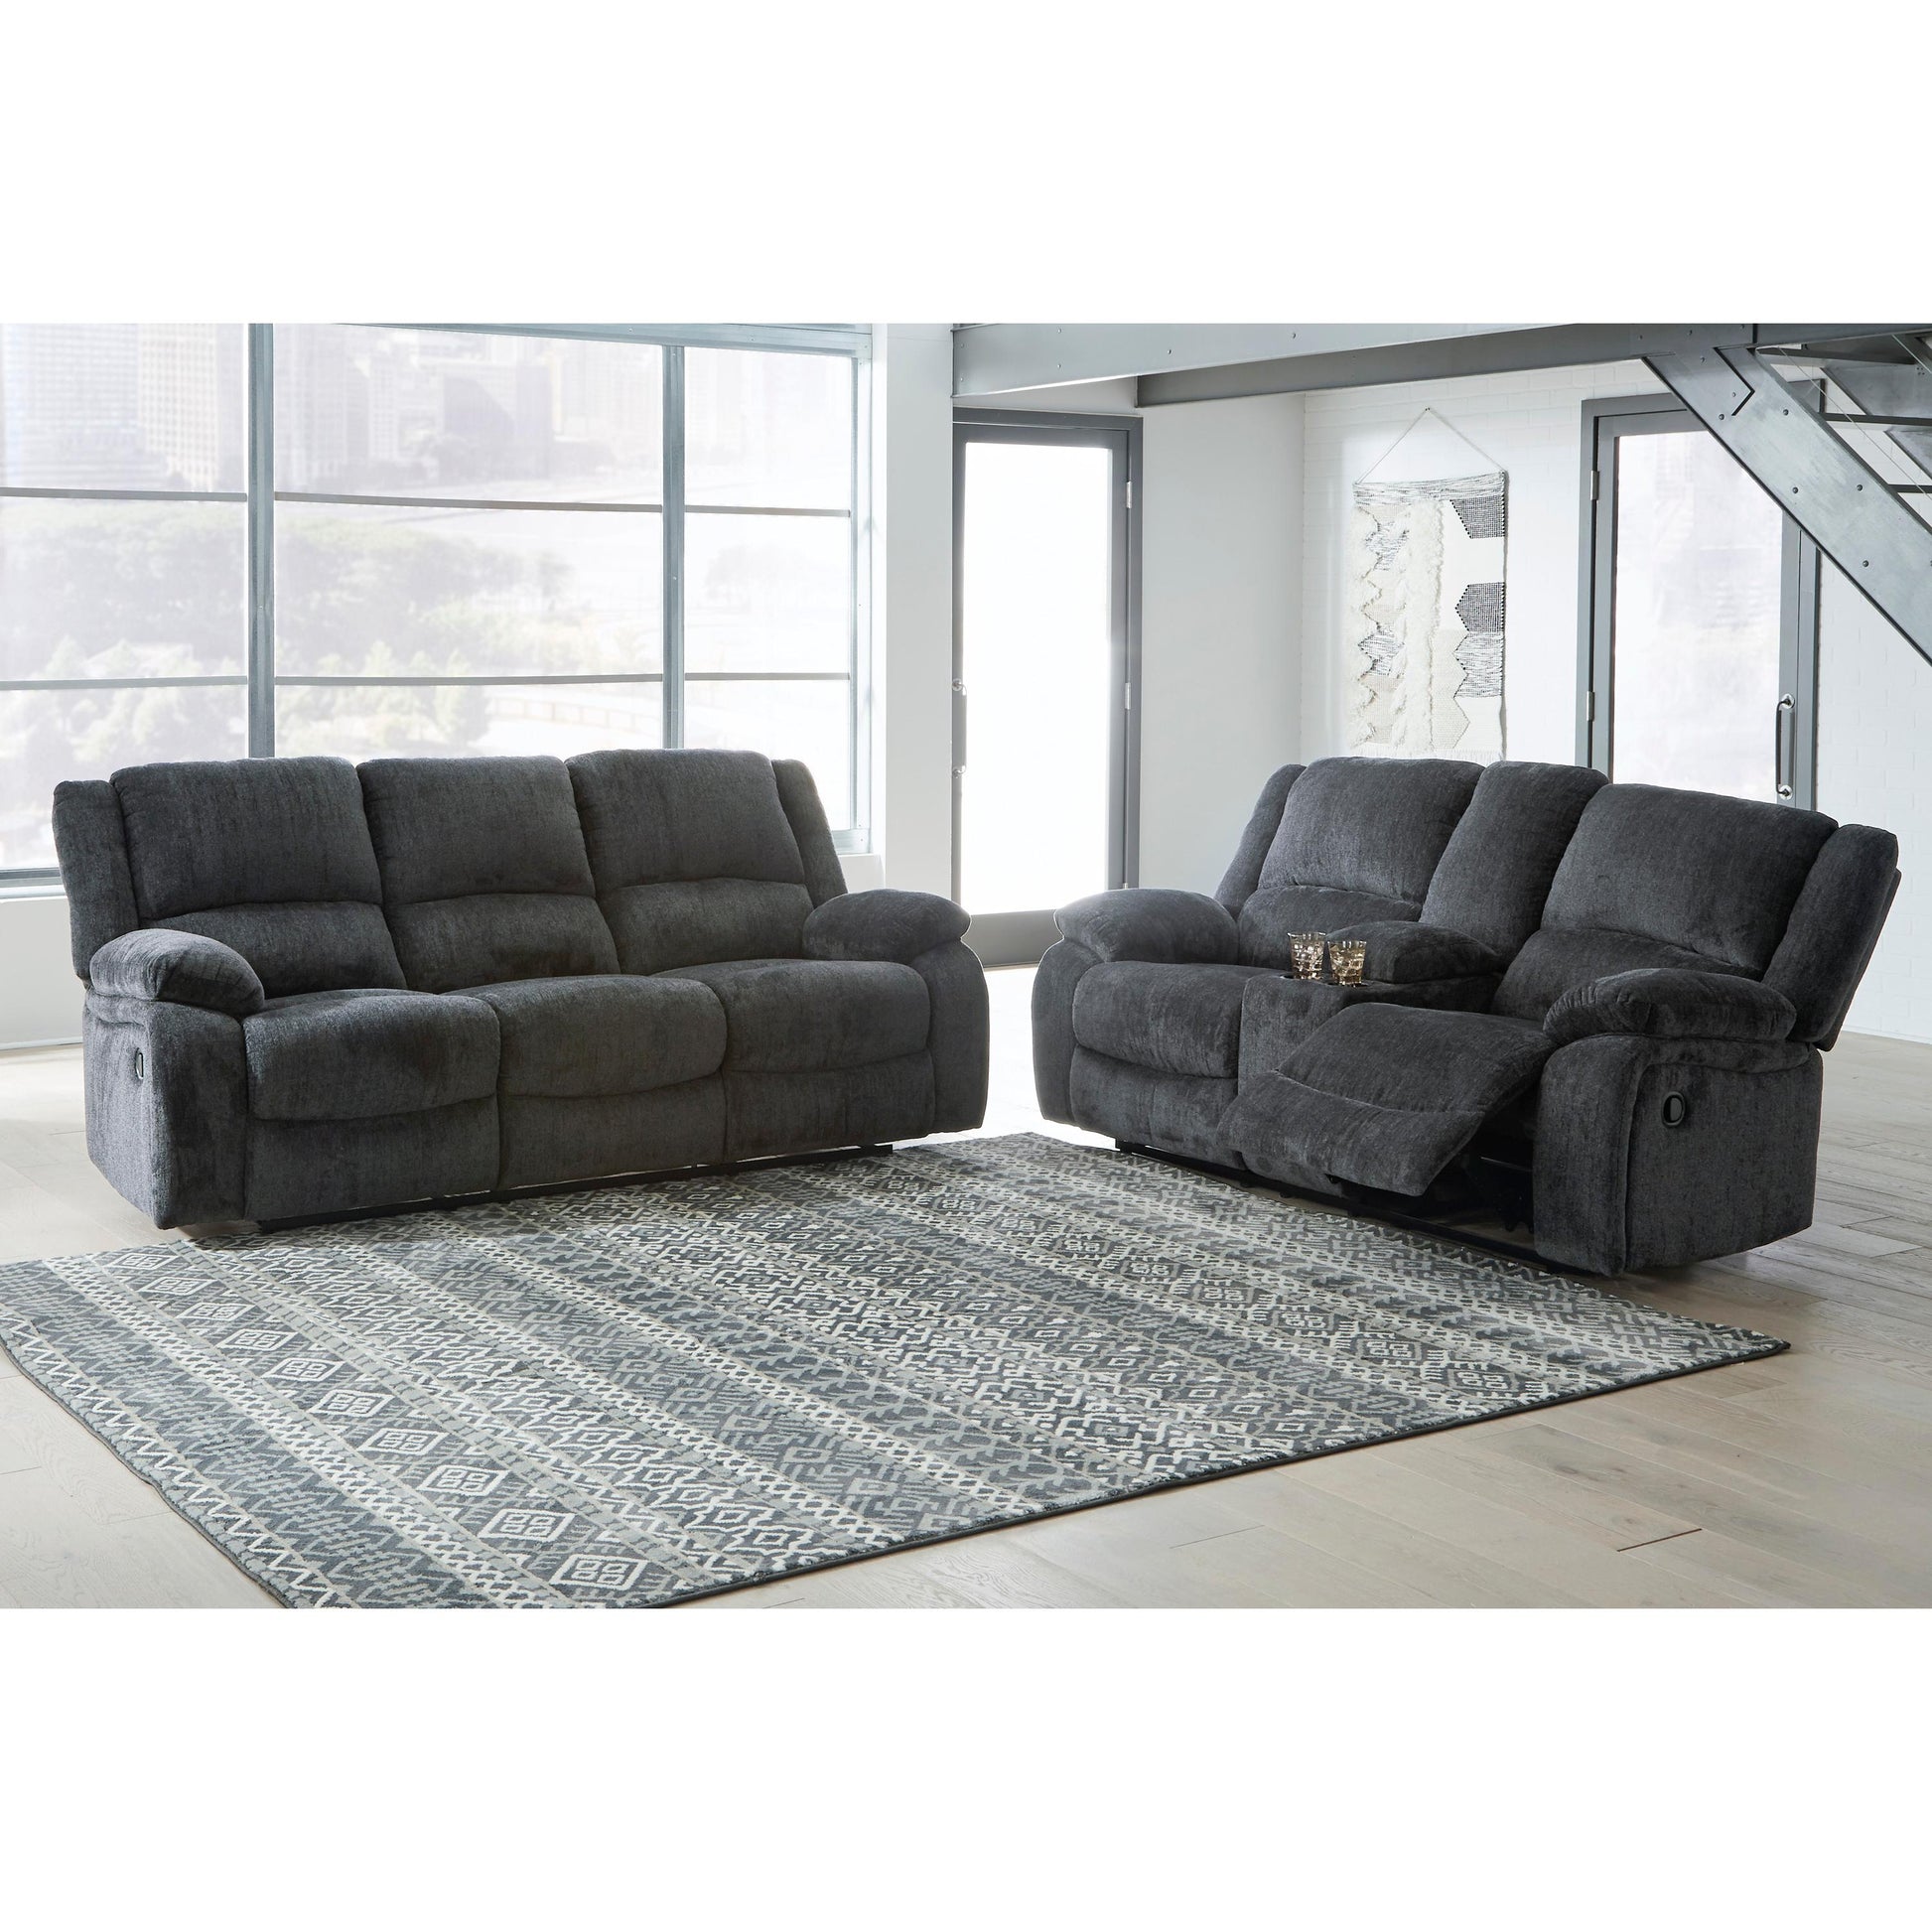 Signature Design by Ashley Draycoll Reclining Fabric Loveseat 7650494